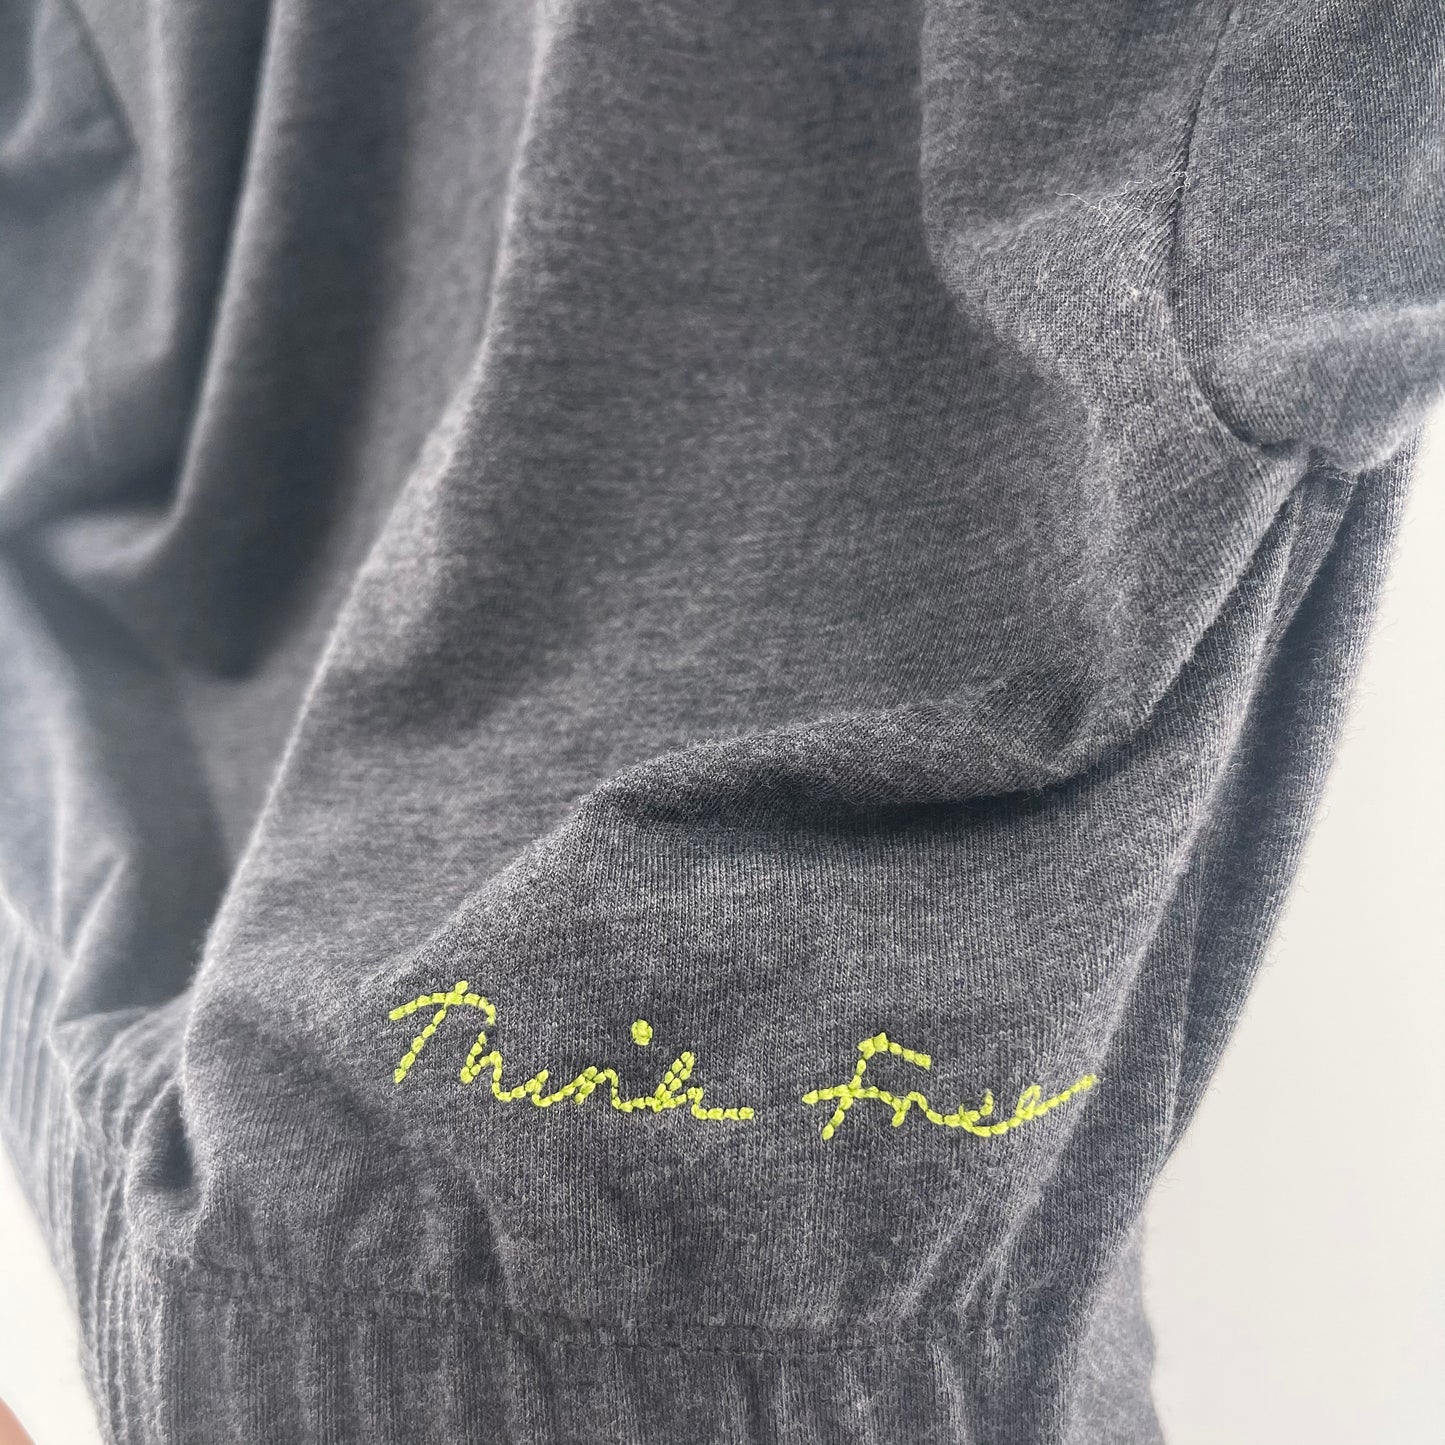 Free People Movement Cropped Grey T (XS)